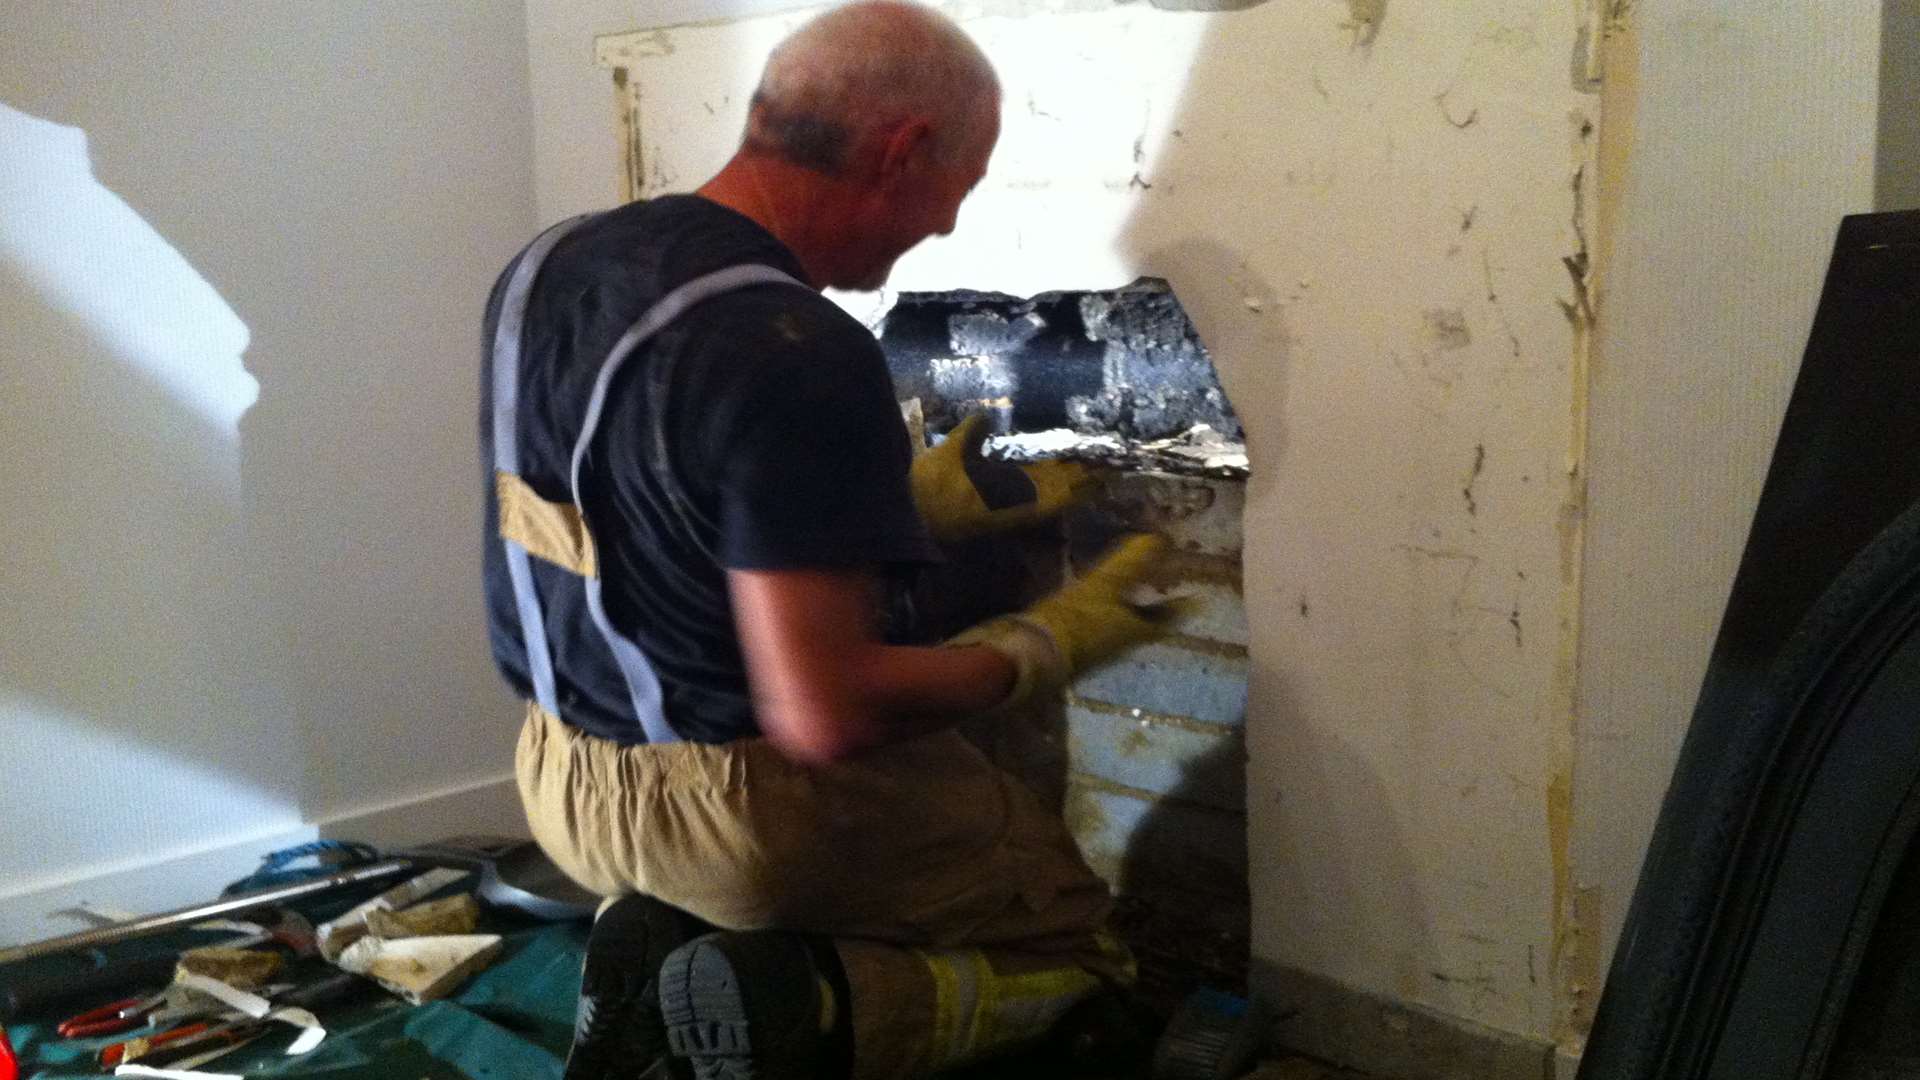 A firefighter dismantles the fire surround to reach Frank the cat